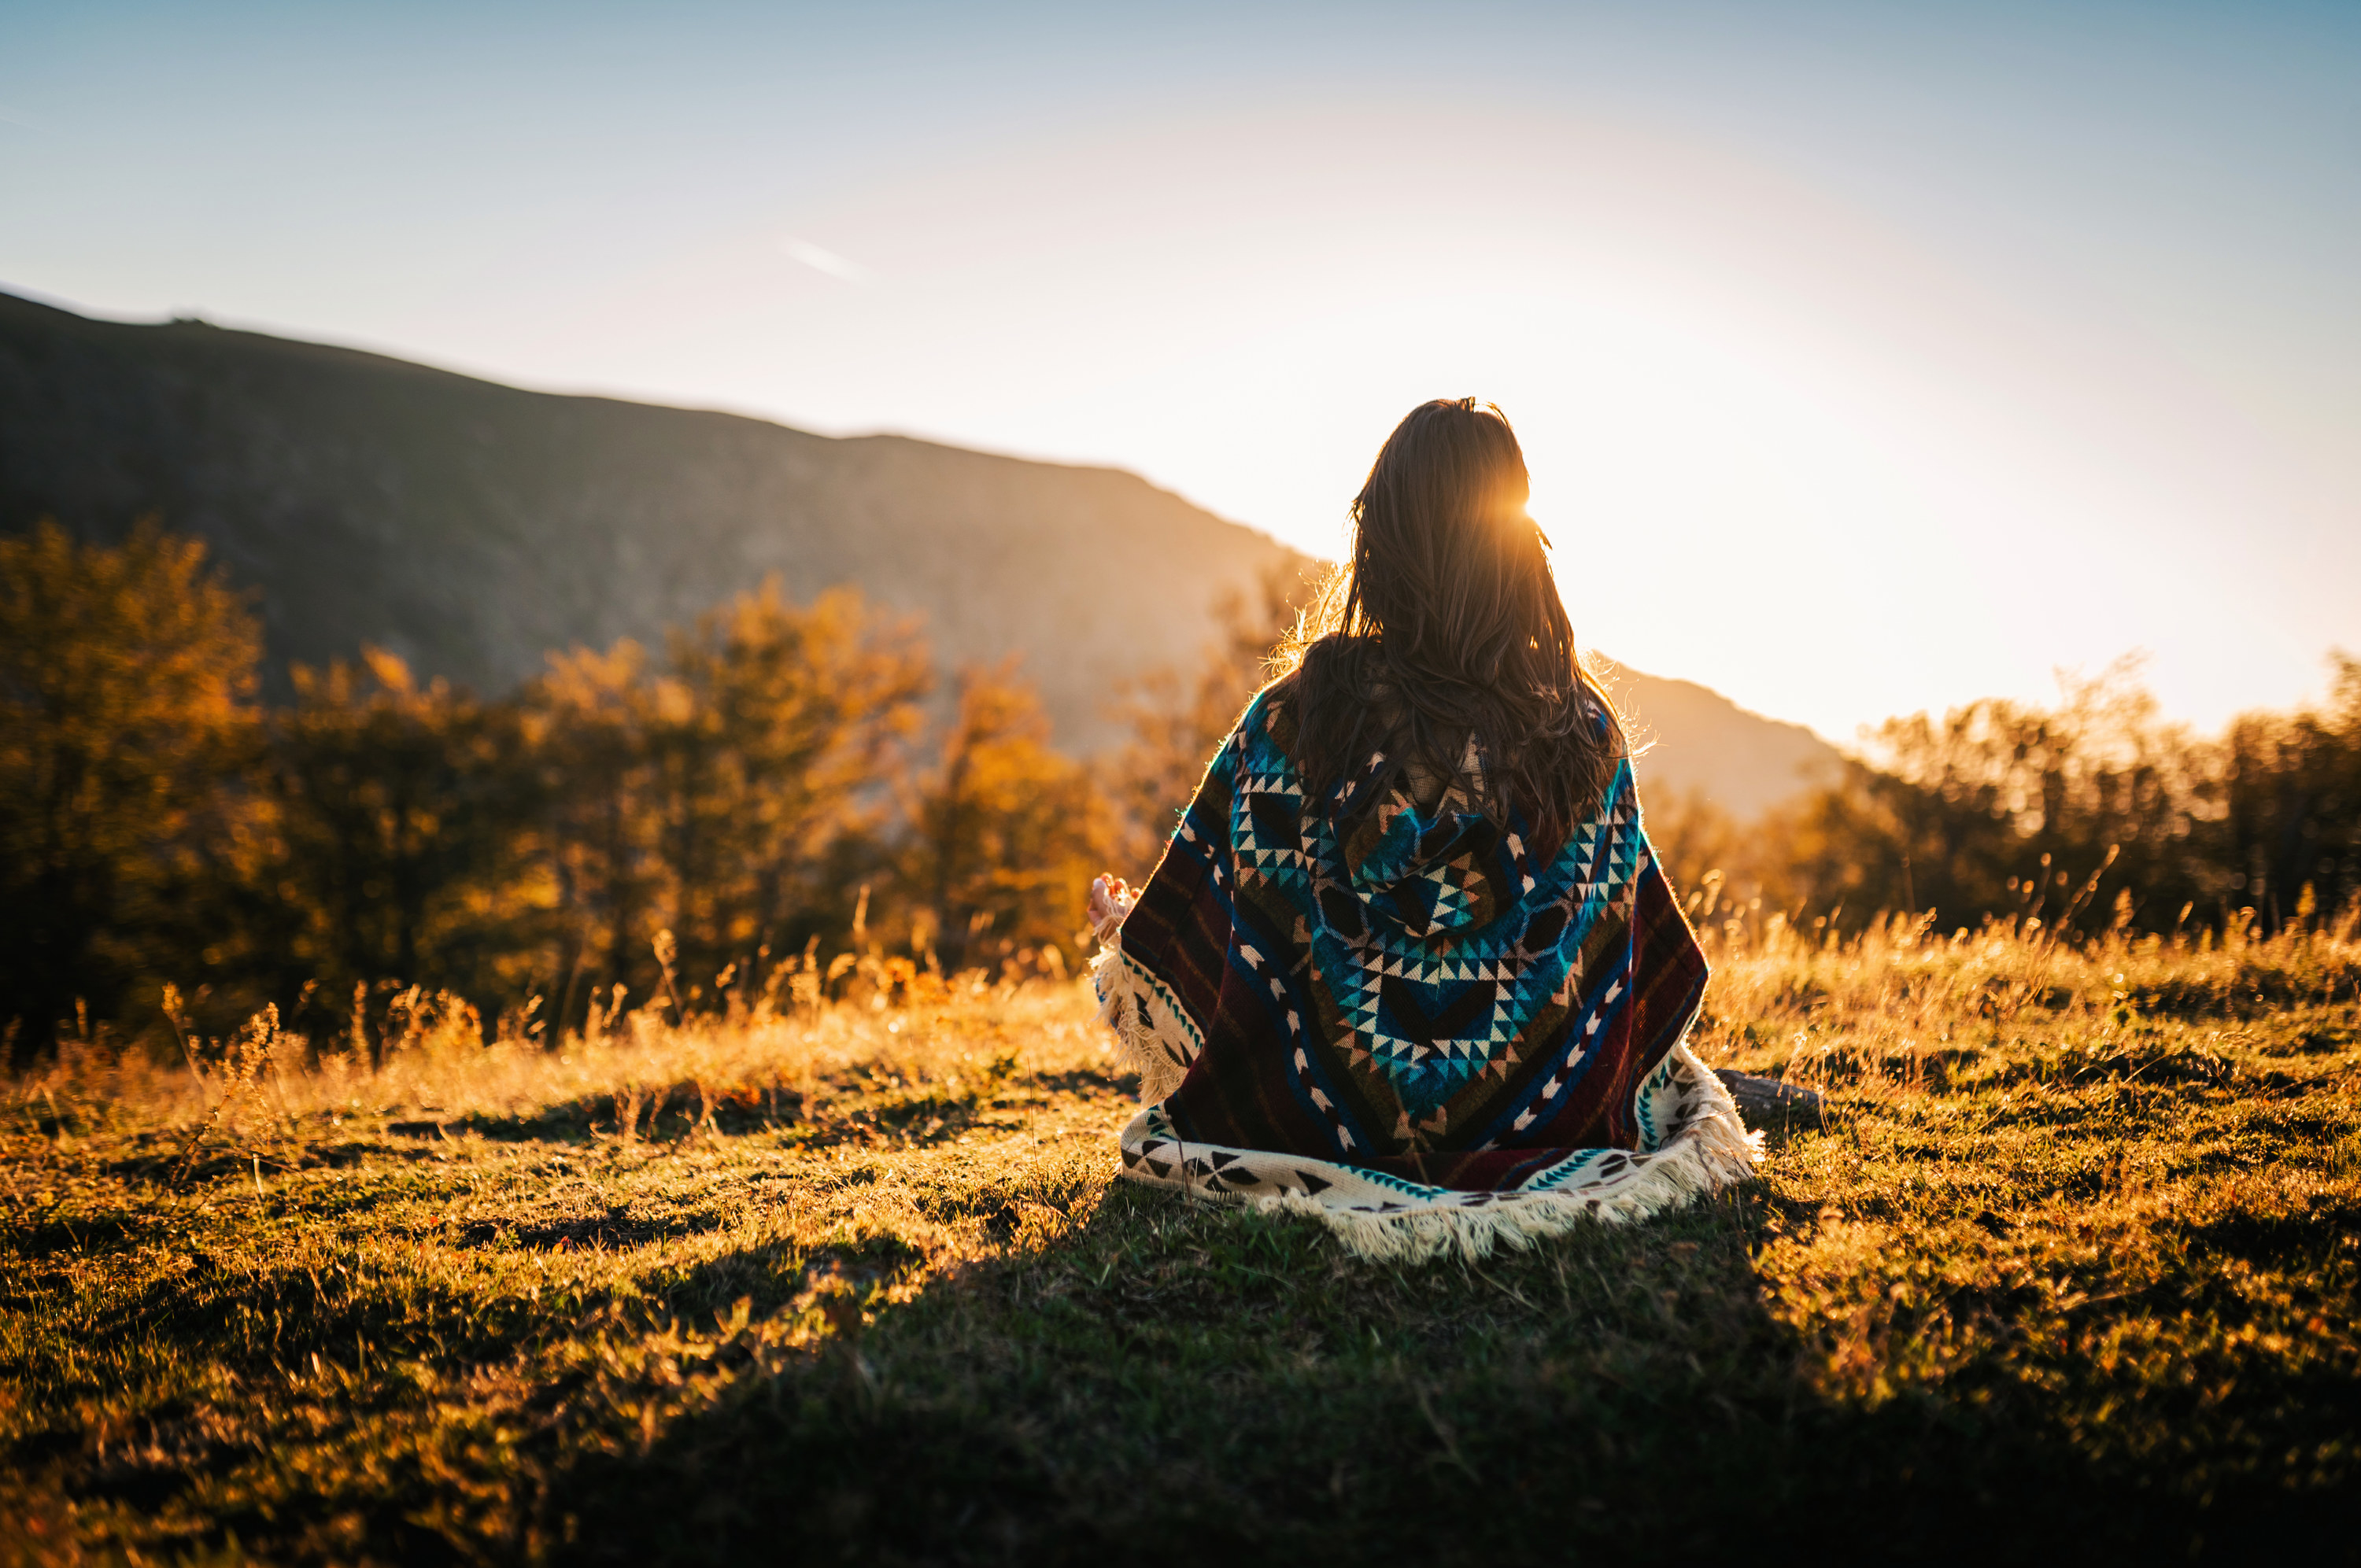 Woman sitting in a woven Native American blanket